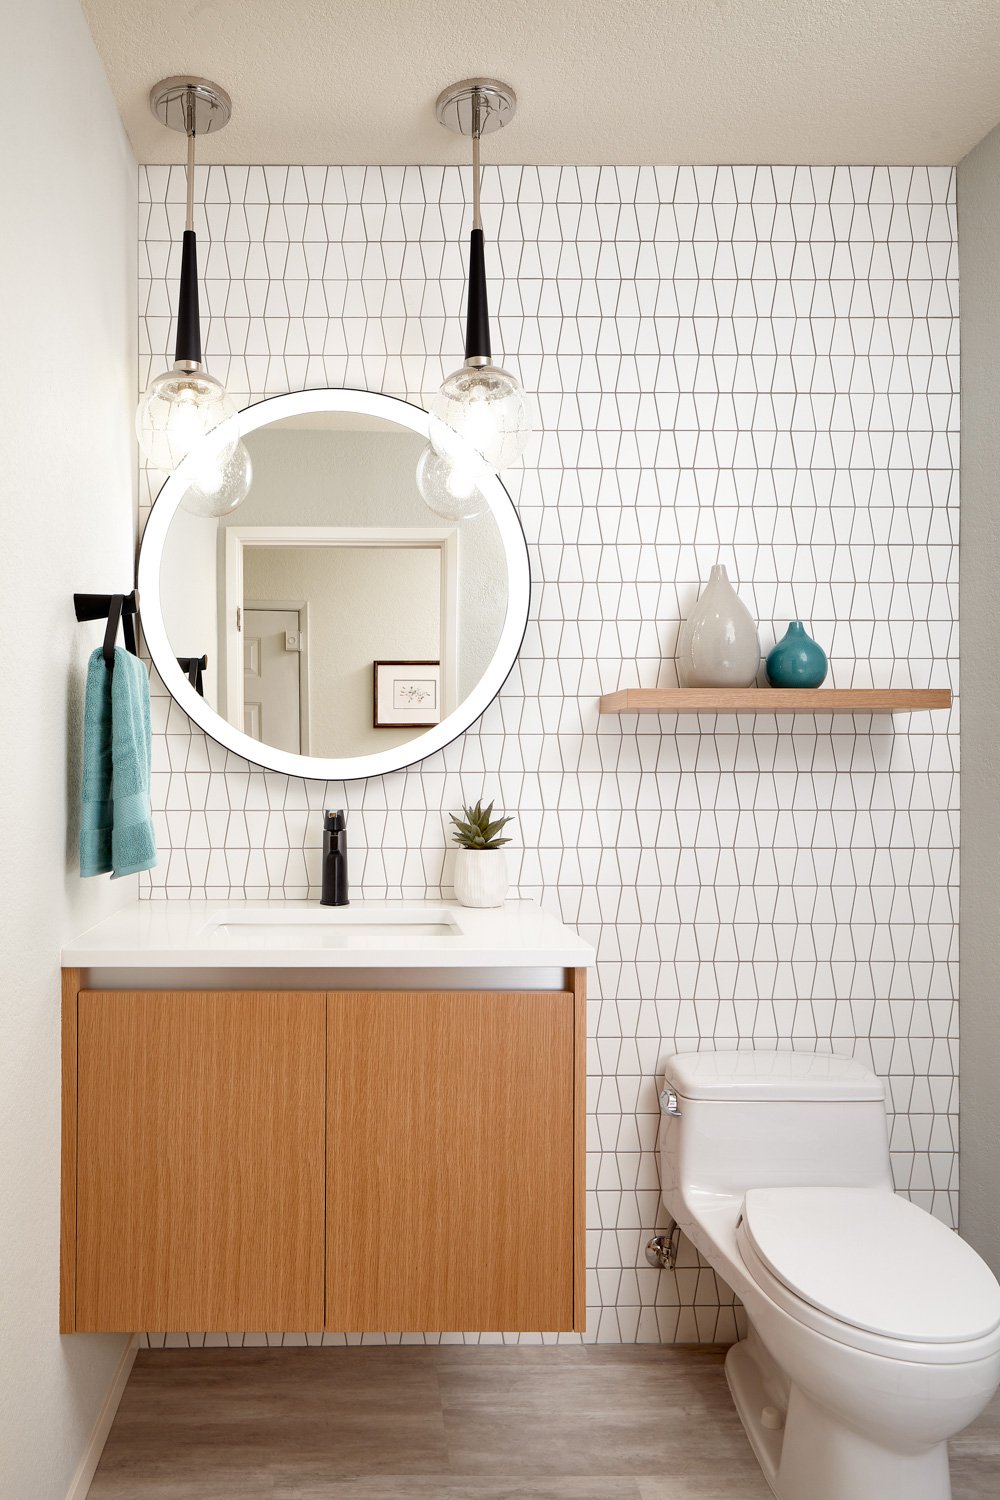 Bright white bathroom with wooden drawers and shelving